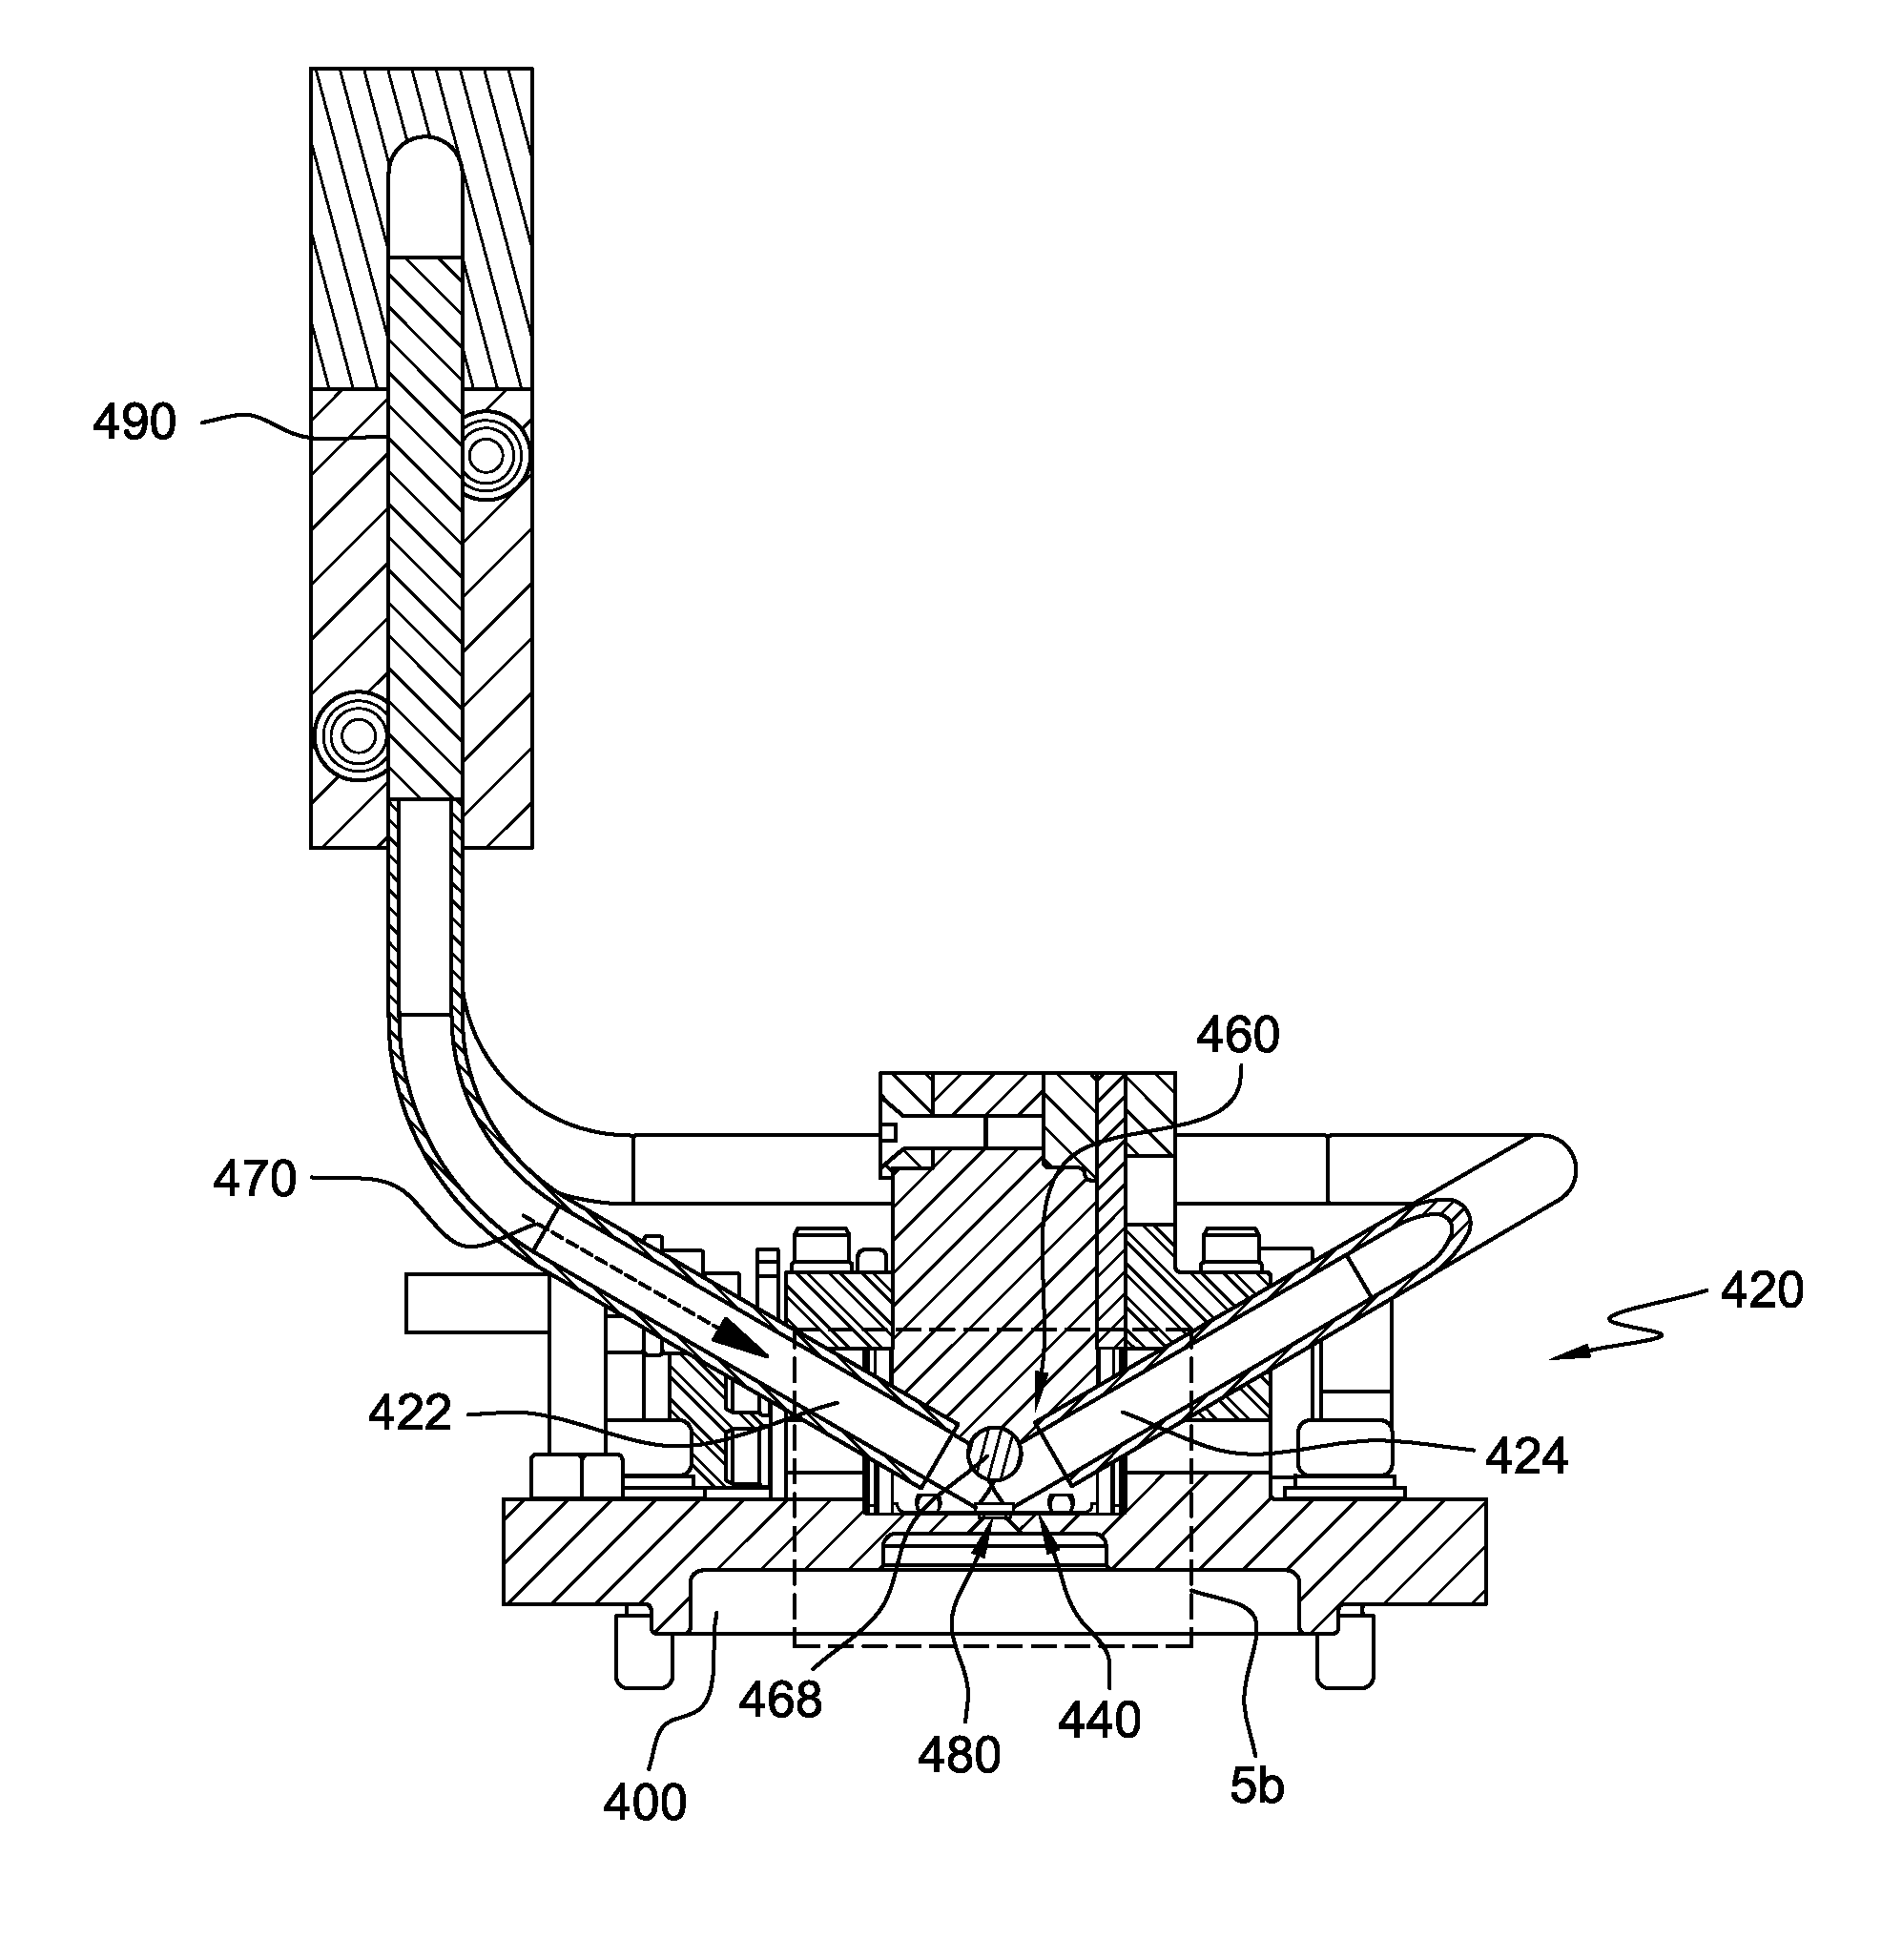 Sample viscosity and flow control for heavy samples, and x-ray analysis applications thereof